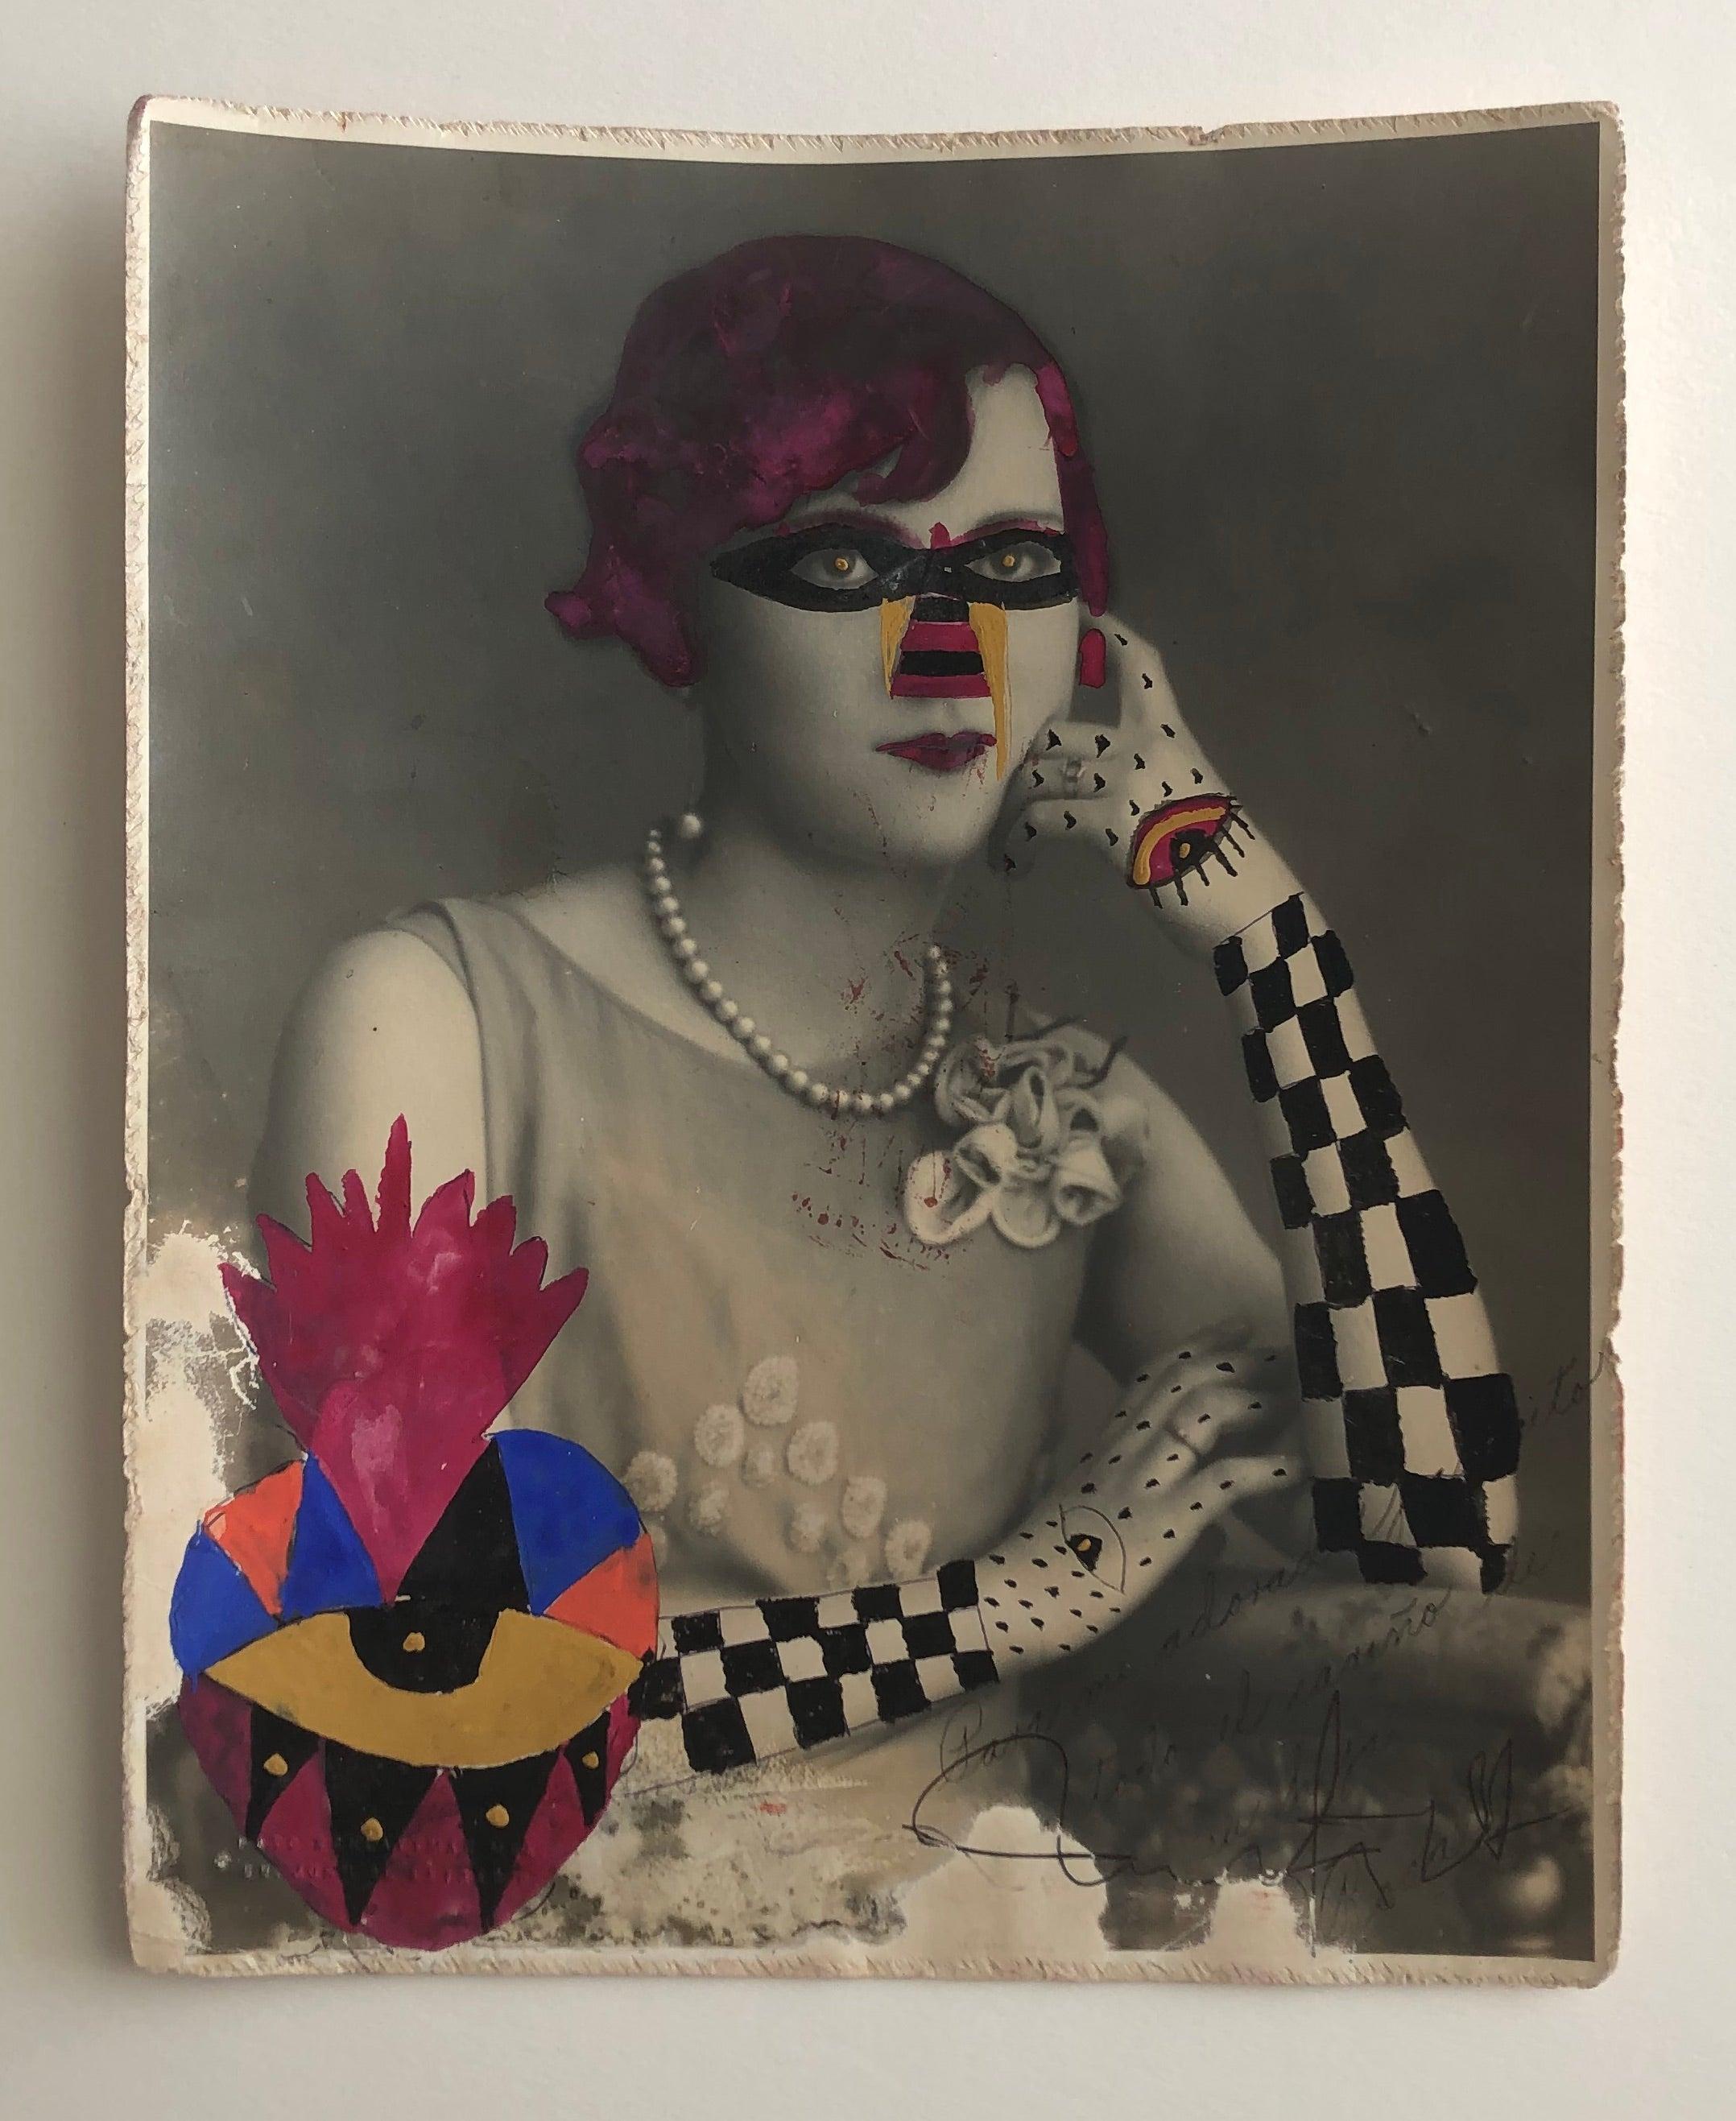 Checker Arm Lady by Leobardo Huerta 
Mixed media- Vintage photograph intervened by the artist with pen and acrylic paint.

Image size: 9.5 in. H x 8.75 in. W 
Sheet size 15.5 in H x 12.75 in W
Framed size: 18 in H x 16.5 in W x 1 in. D

Leobardo